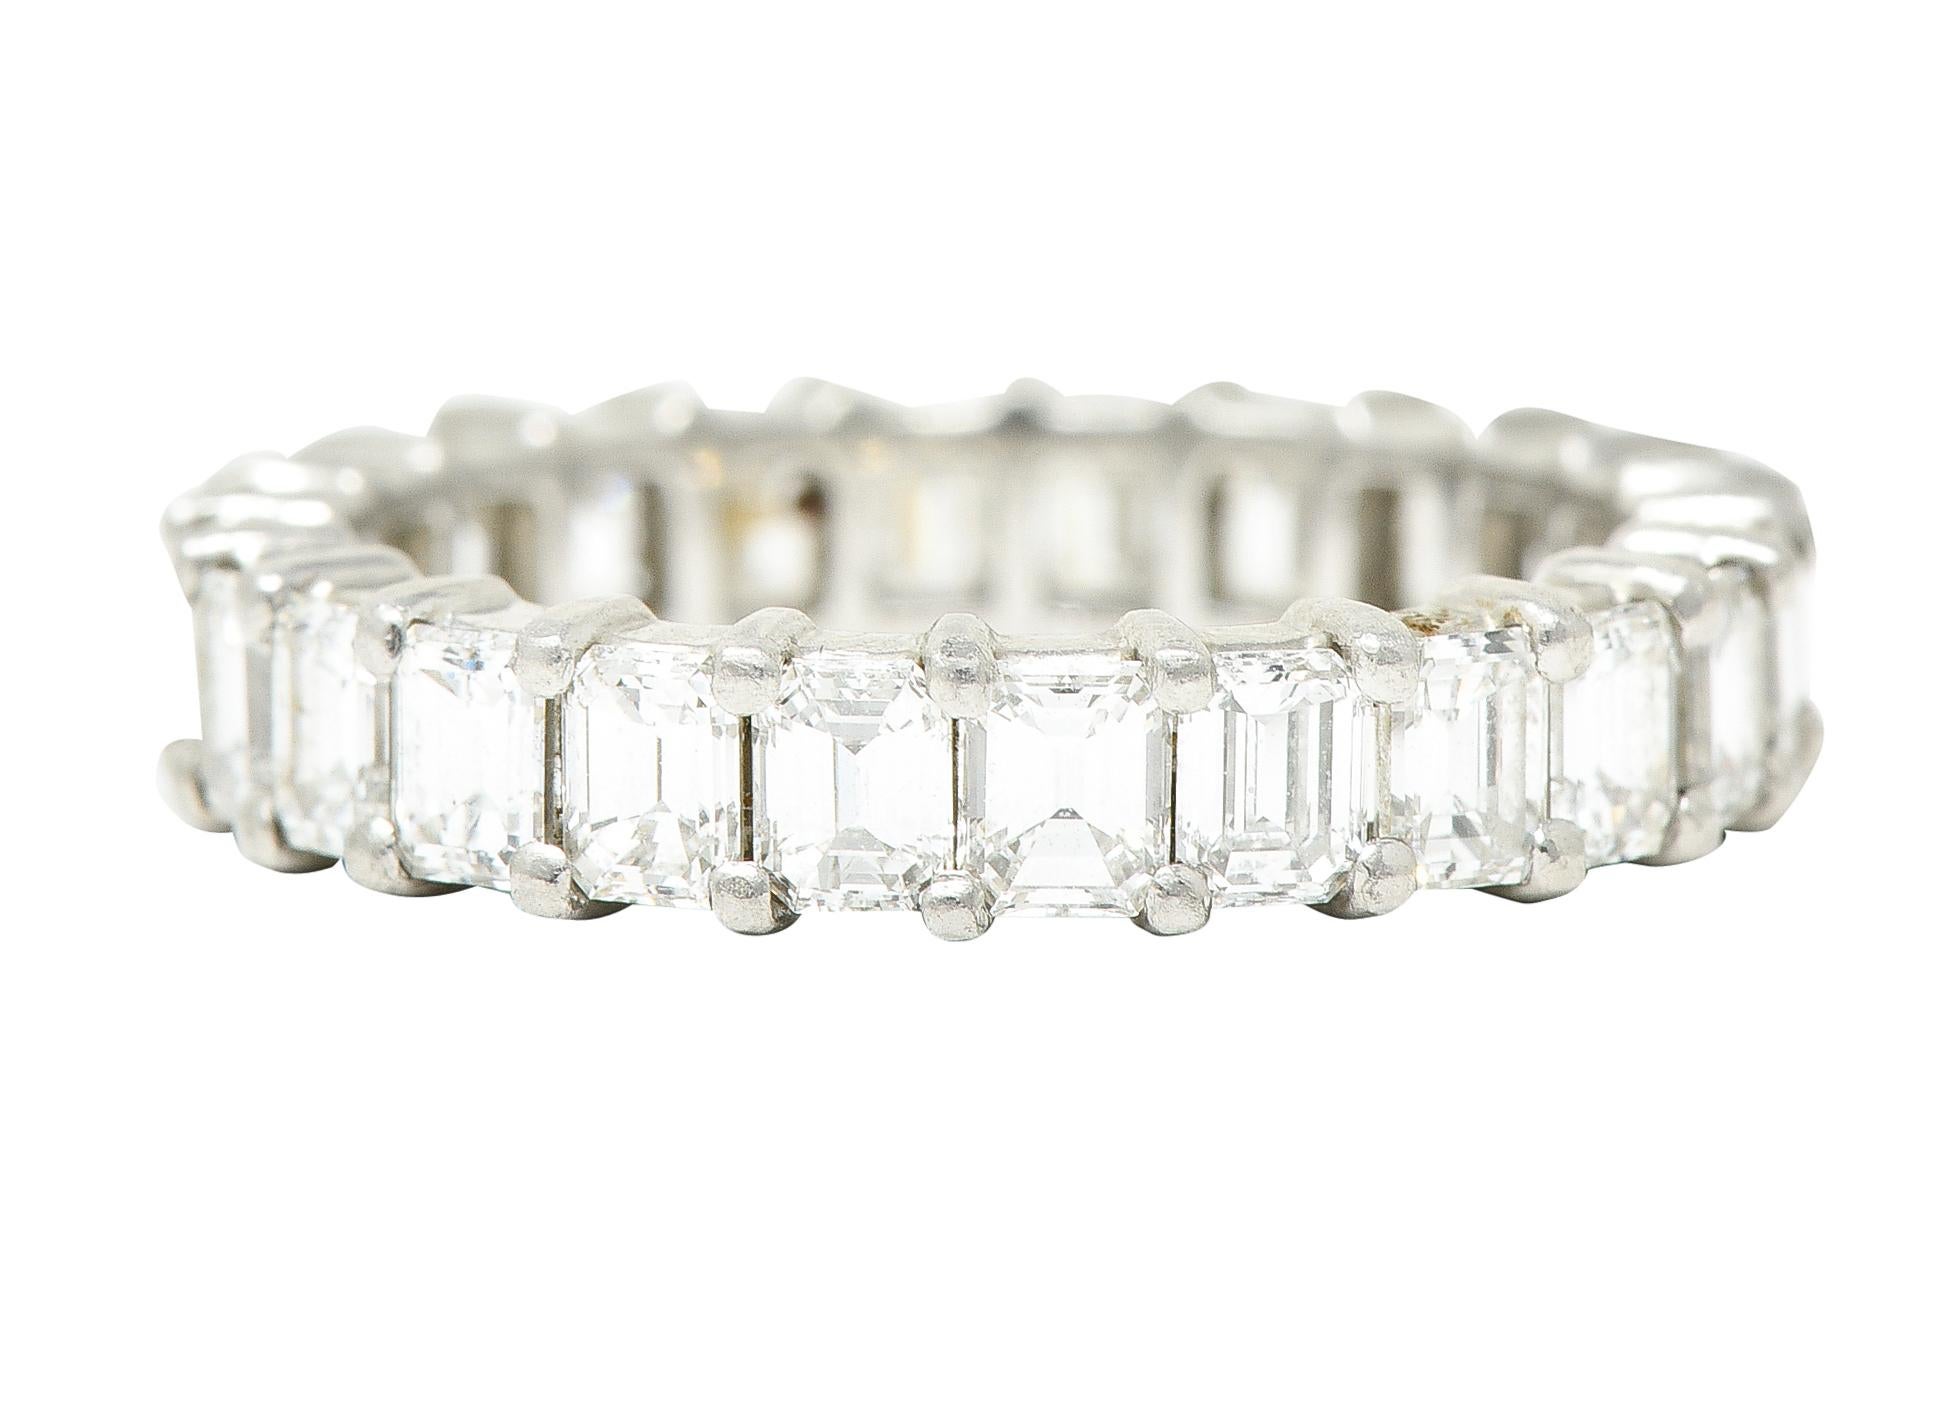 Eternity band ring is set with emerald cut diamonds. Fully around via shared prongs. Weighing in total approximately 3.00 carats - G/H color with VS2 clarity. Tested as platinum. Circa: 1950s. Ring Size: 6 & not sizable. Measures North to South 4.0